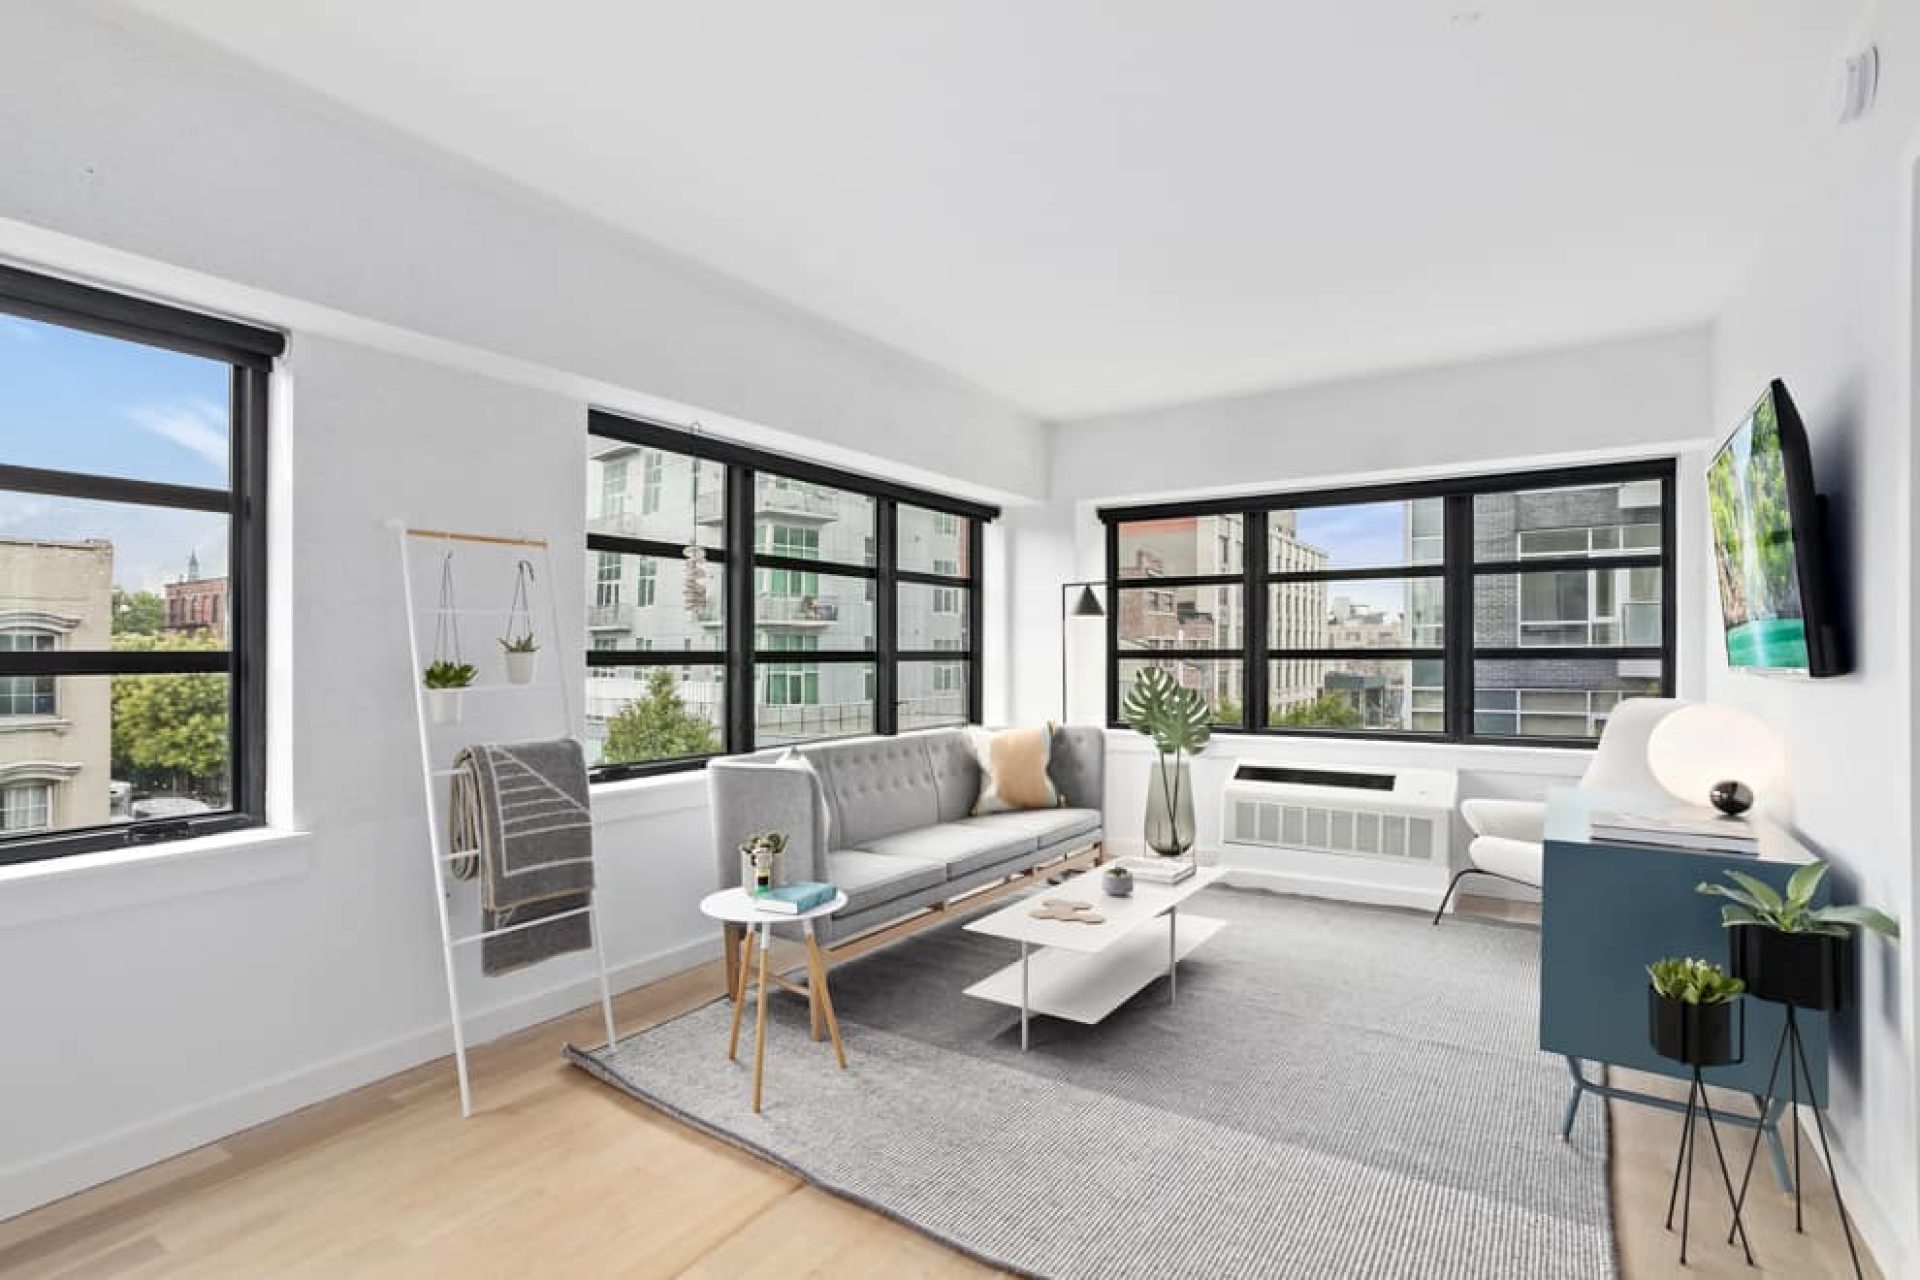 Living room at 66 Ainslie Street apartments with large windows, city views, living room furniture and hardwood floors.